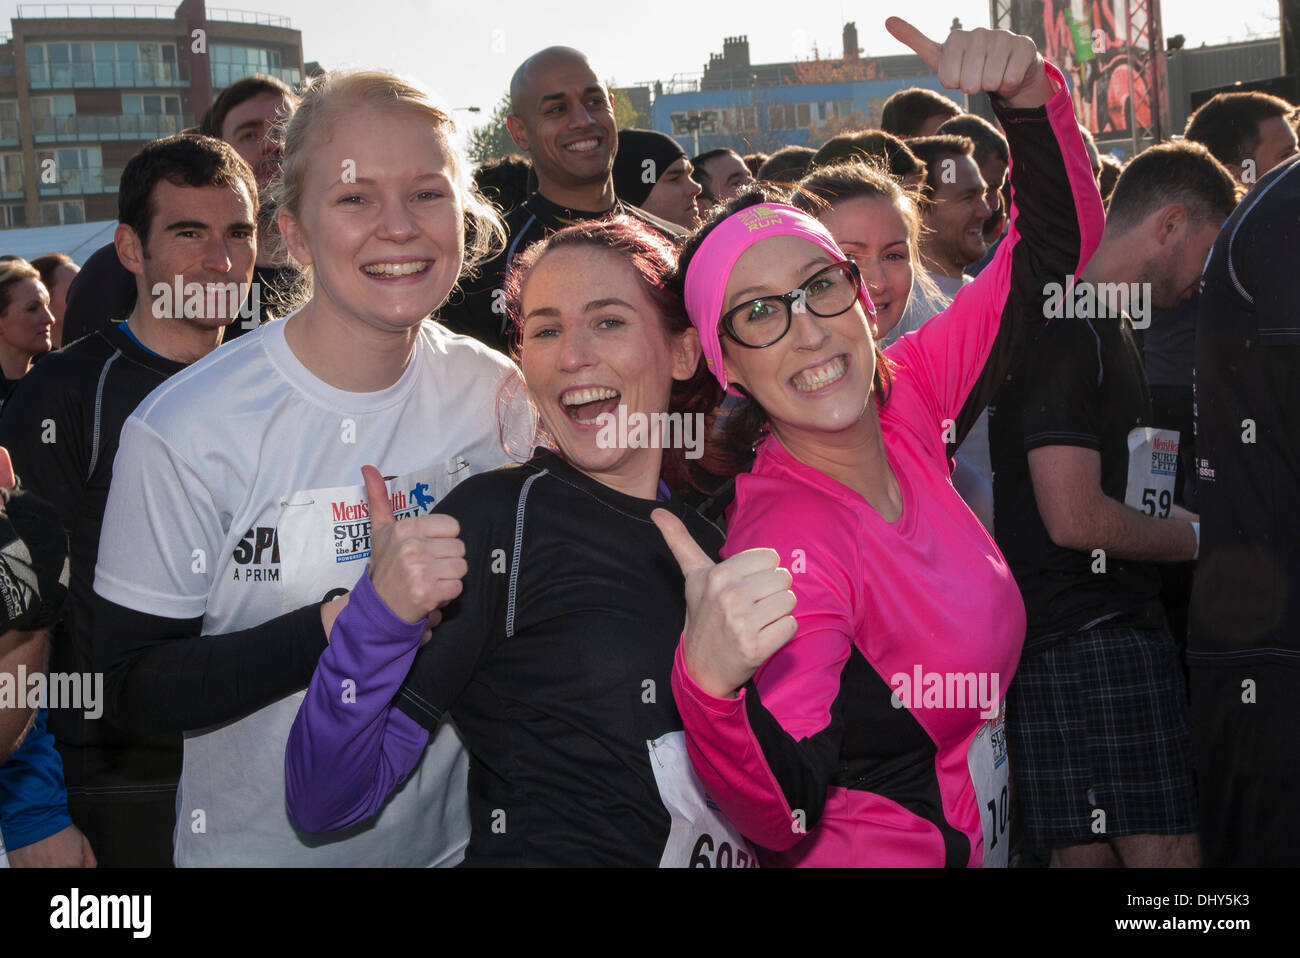 Battersea, London, UK. 16th November 2013. Women warm up before the start at the Men's Health Survival of the Fittest 2013 raceat Battersea Power Station. Credit:  Paul Davey/Alamy Live News Stock Photo